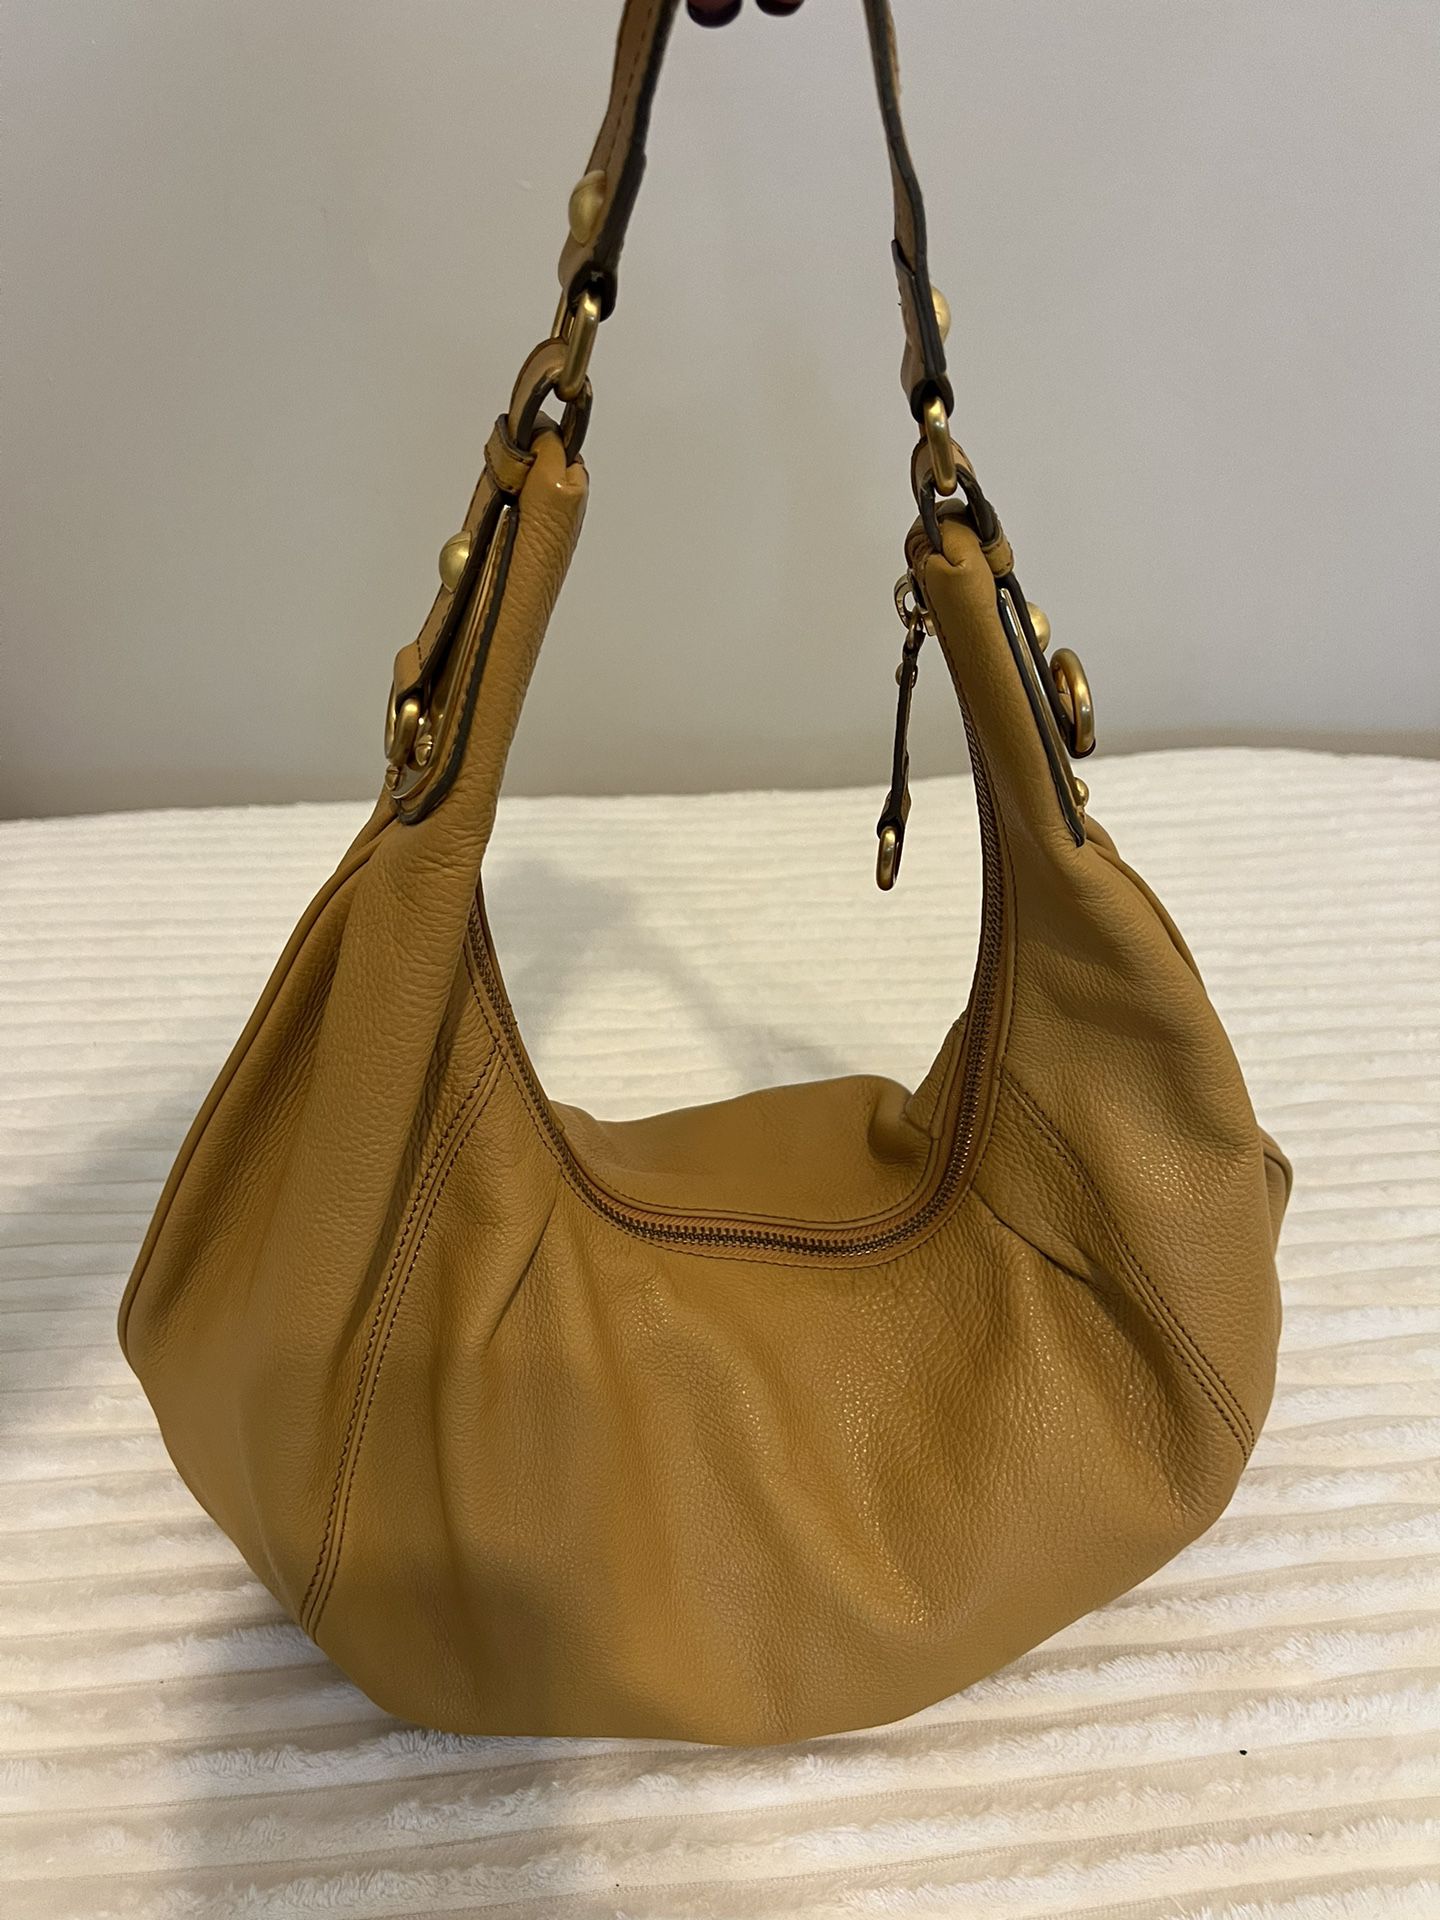 Year-Round, Shoulder Bag Like New